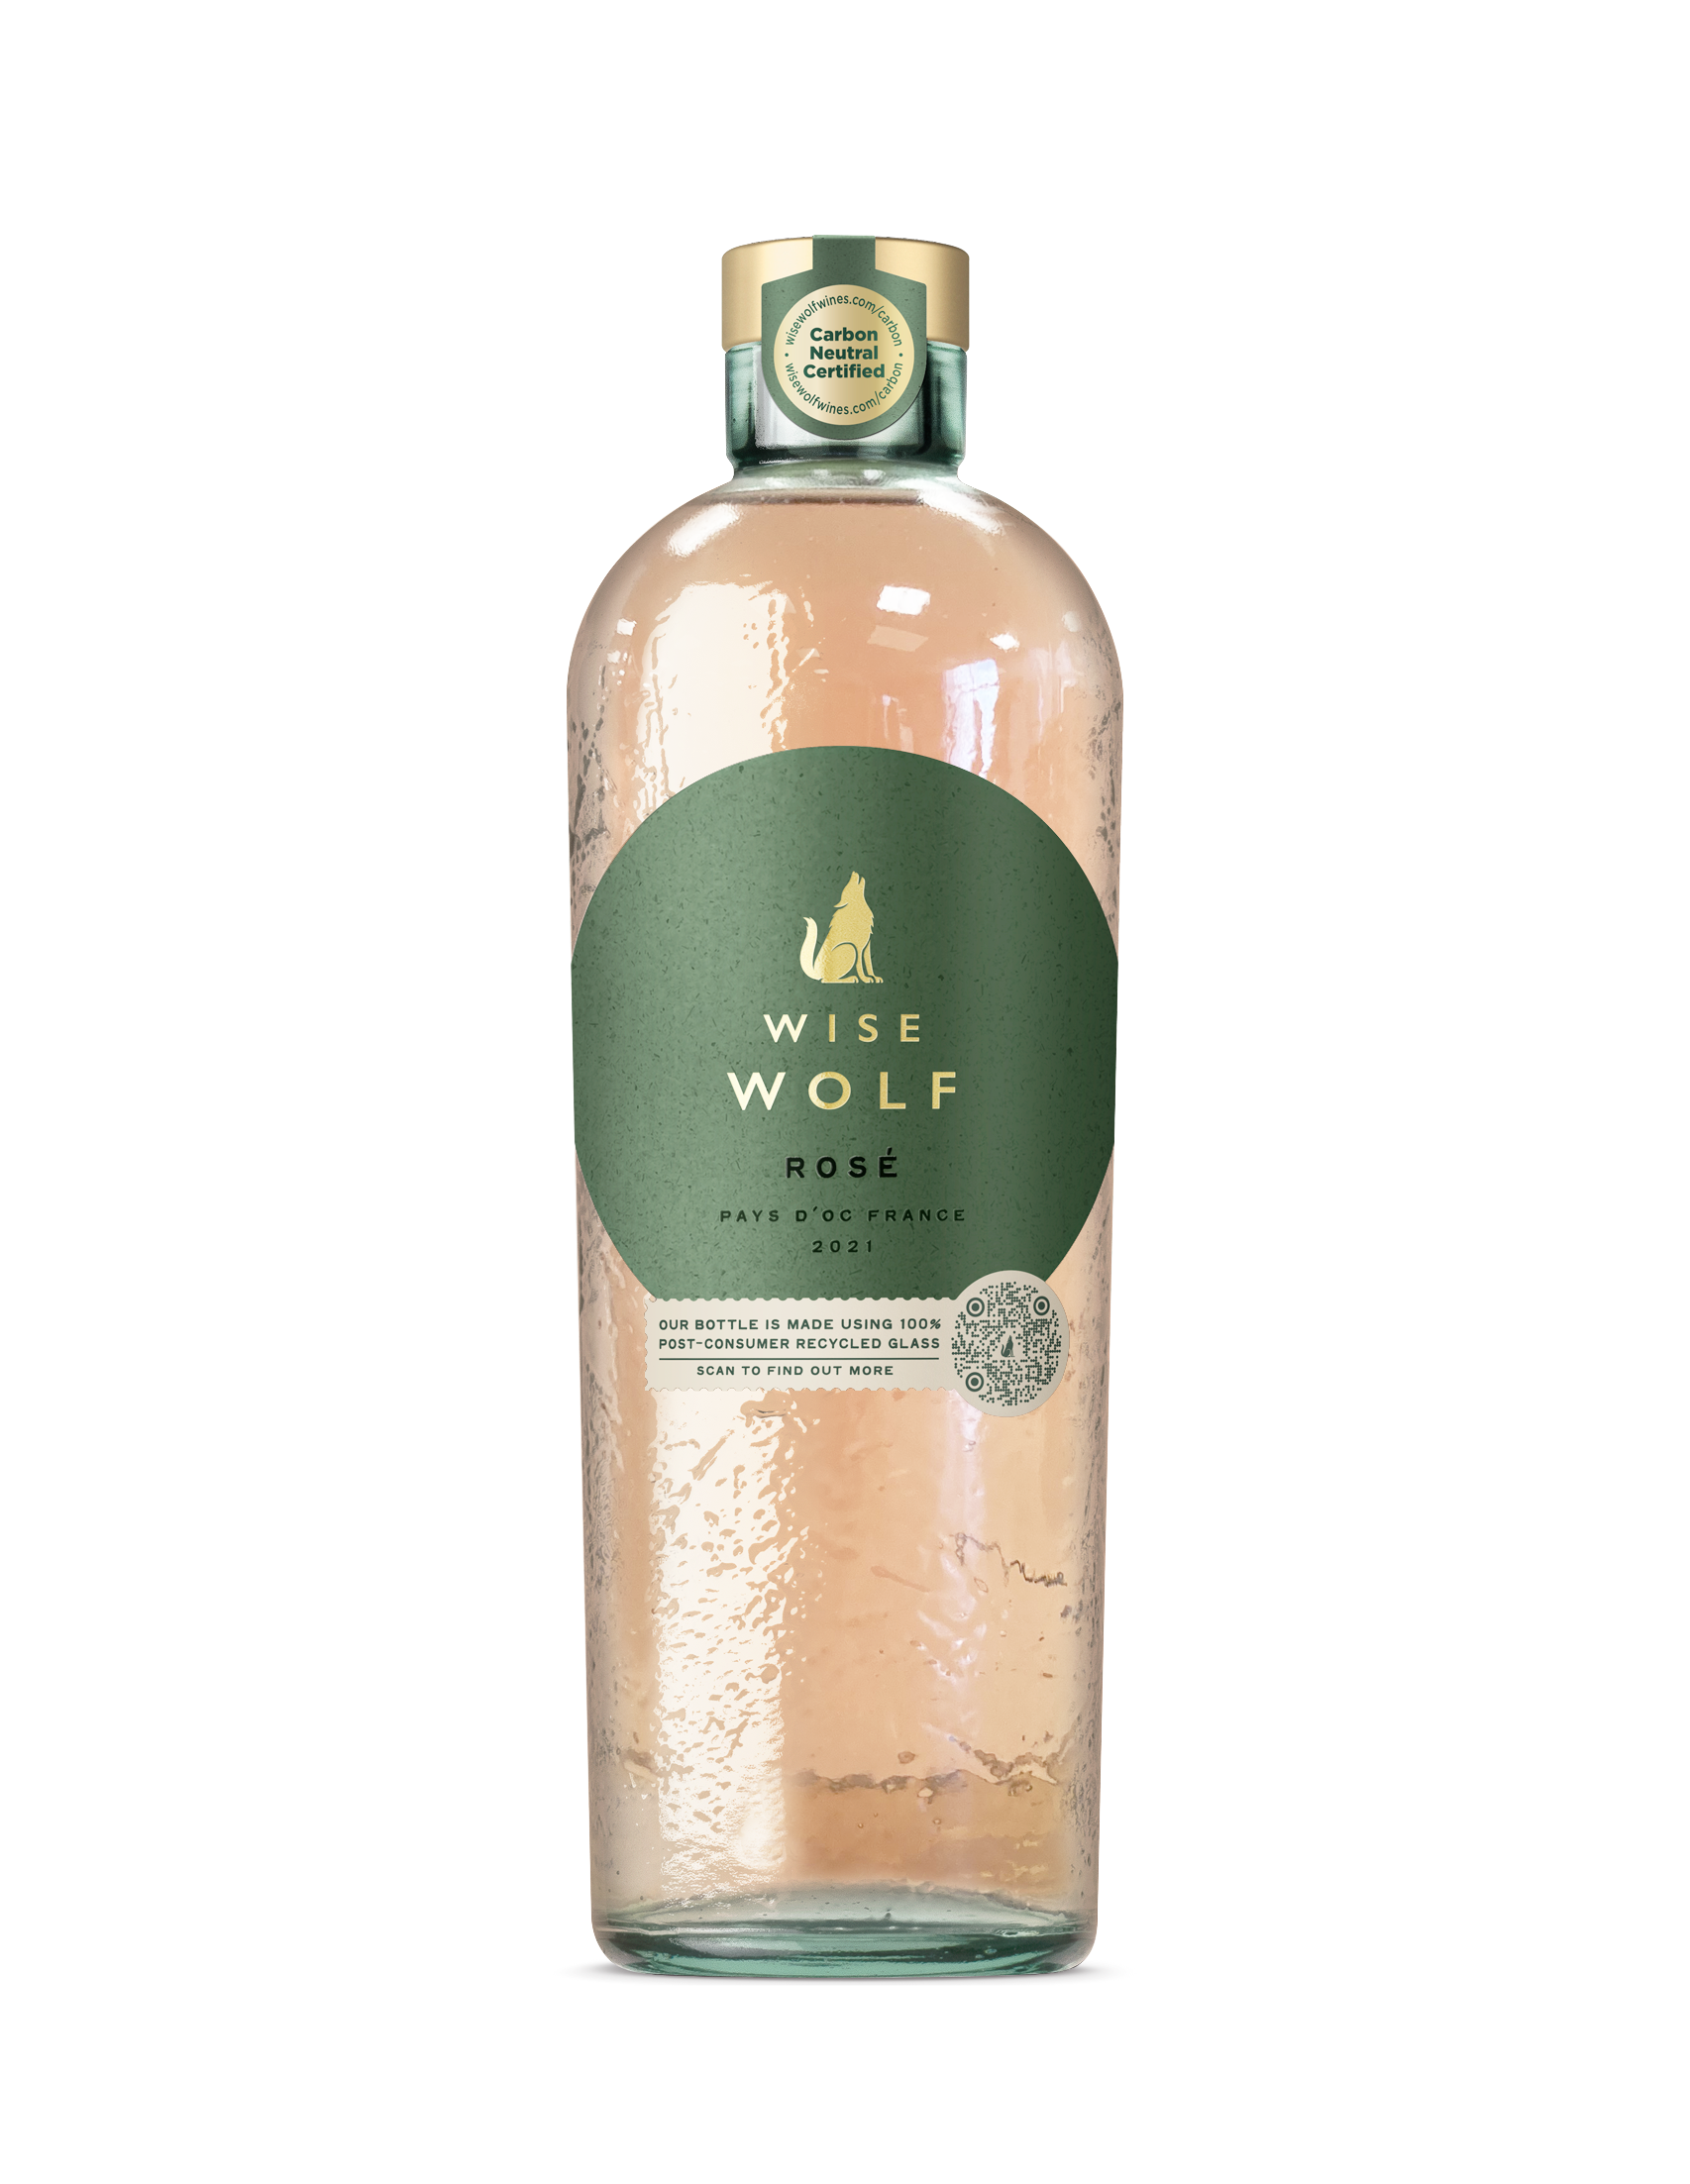 Wise Wolf introduces new wine packaging